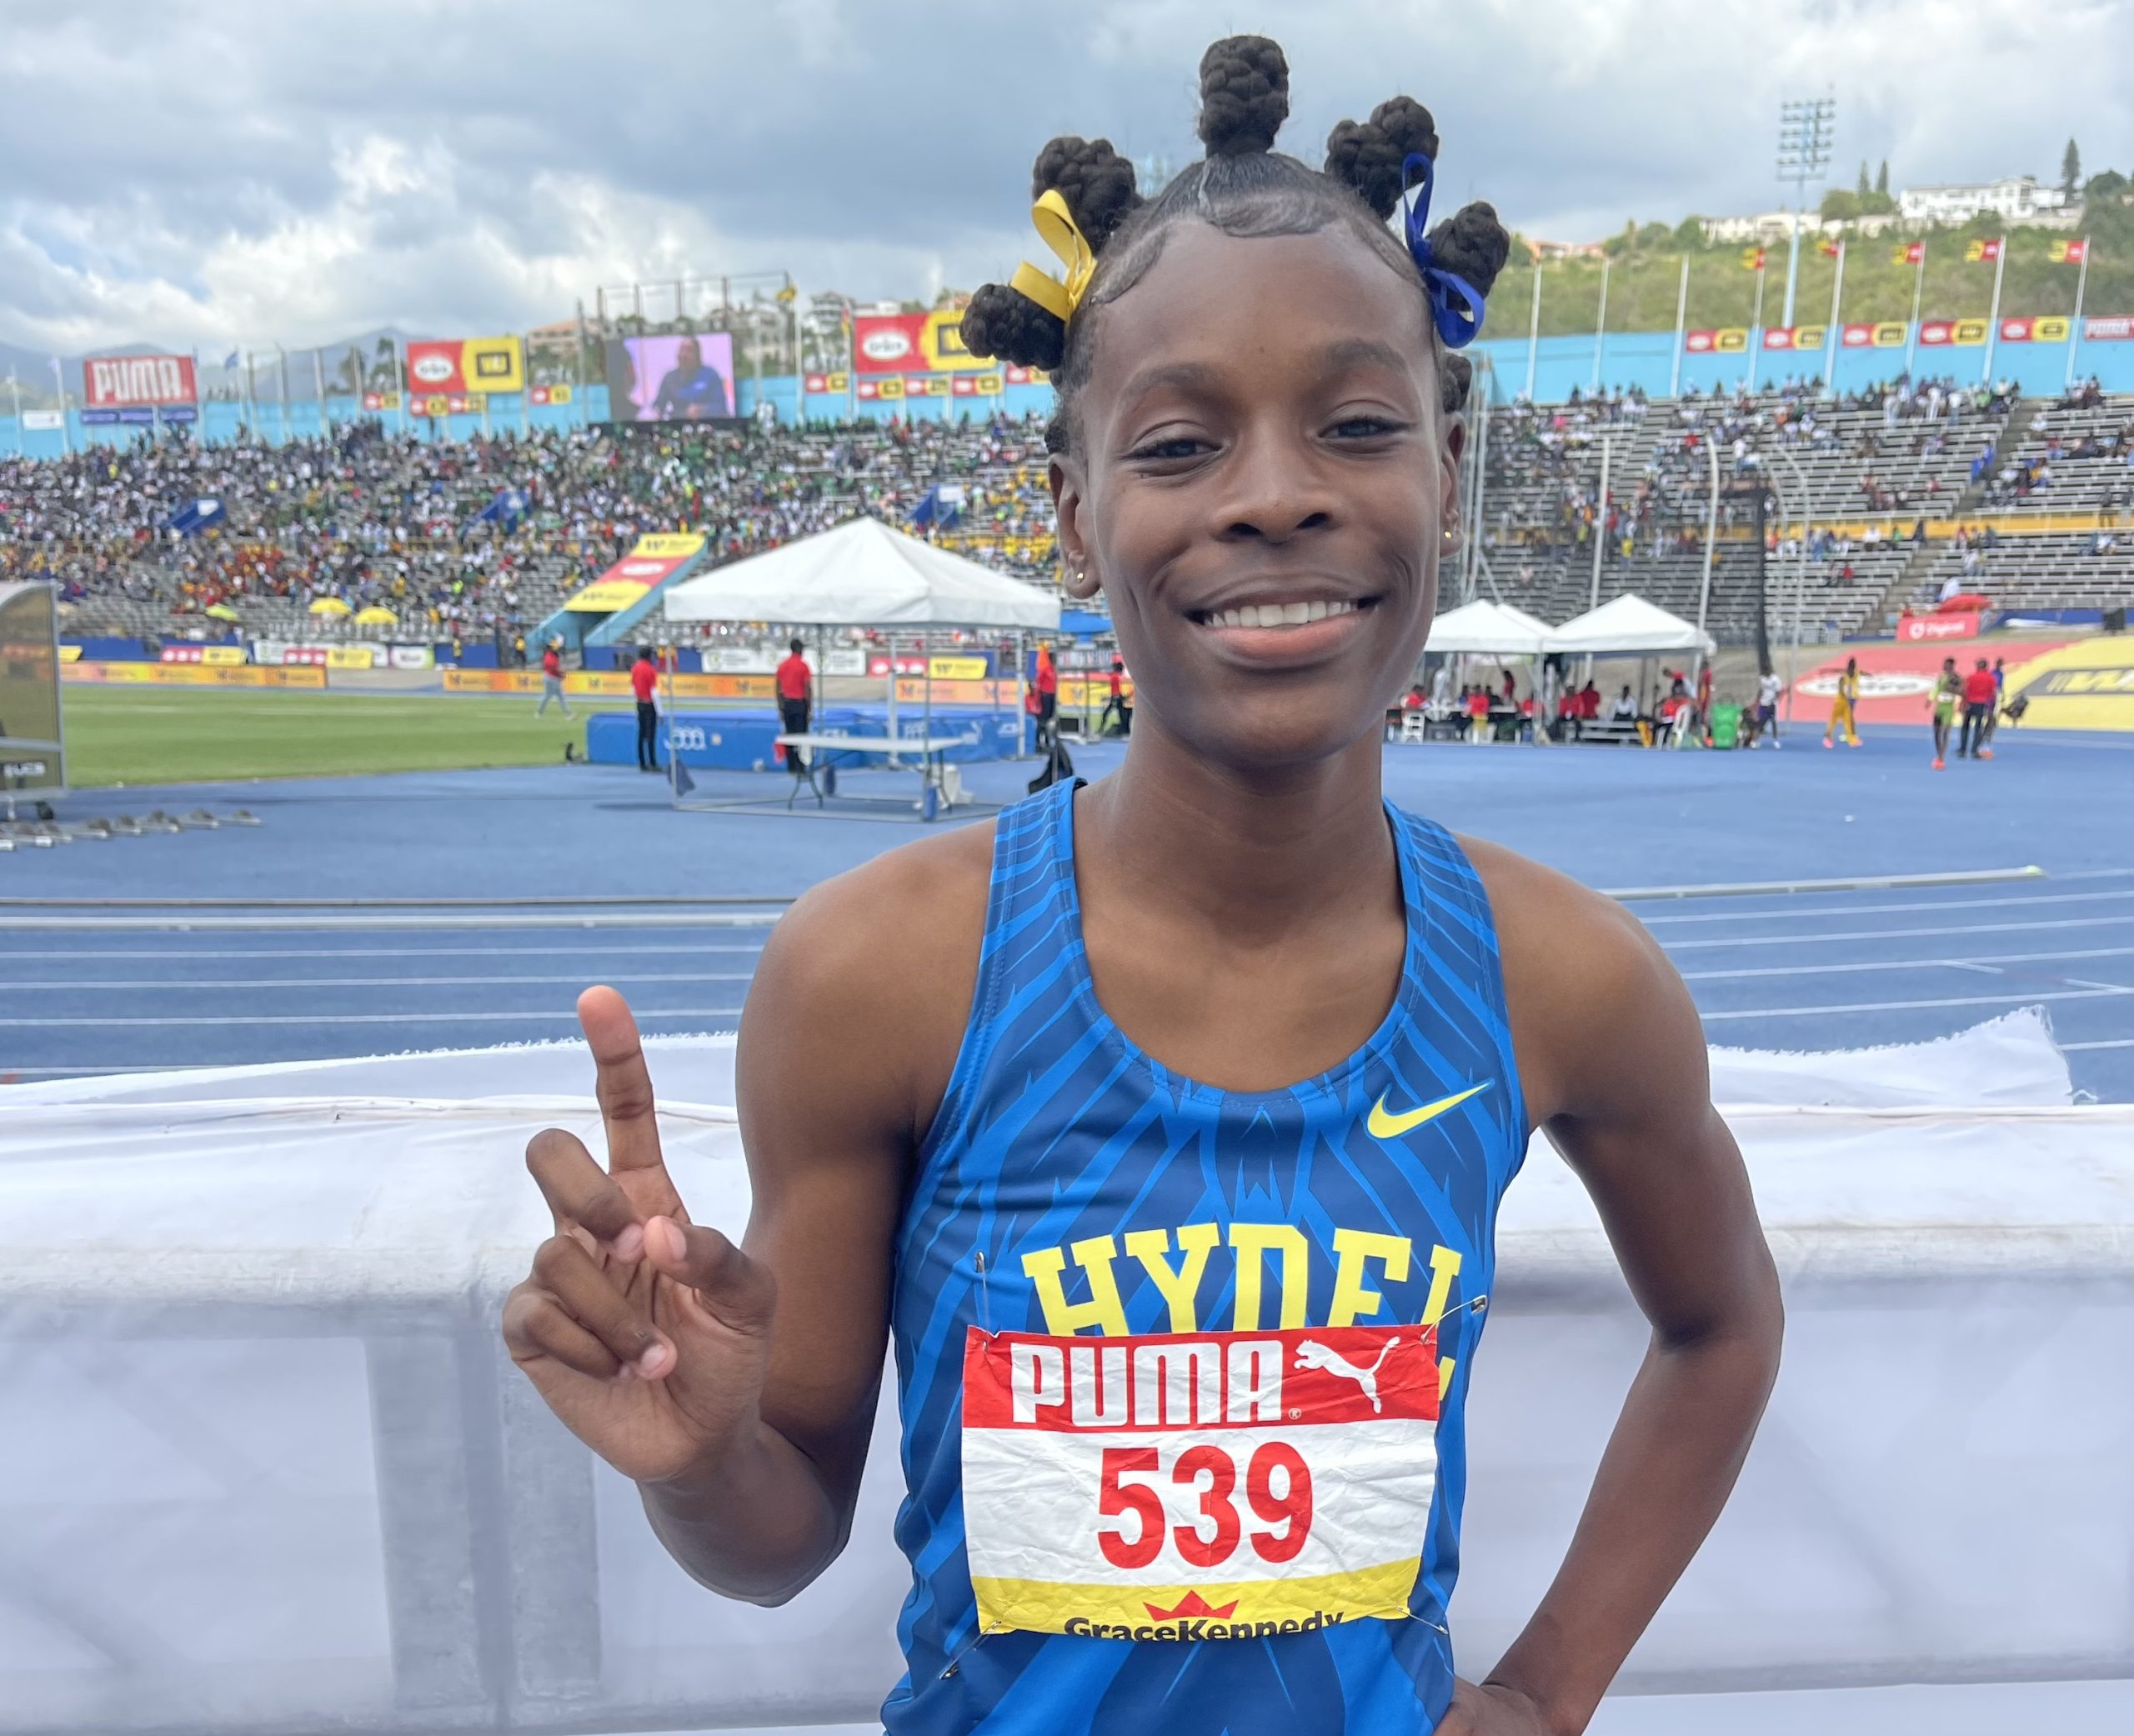 Jamaican Schoolgirl Alana Reid Makes Track and Field History with Sub-11 Second 100m Race